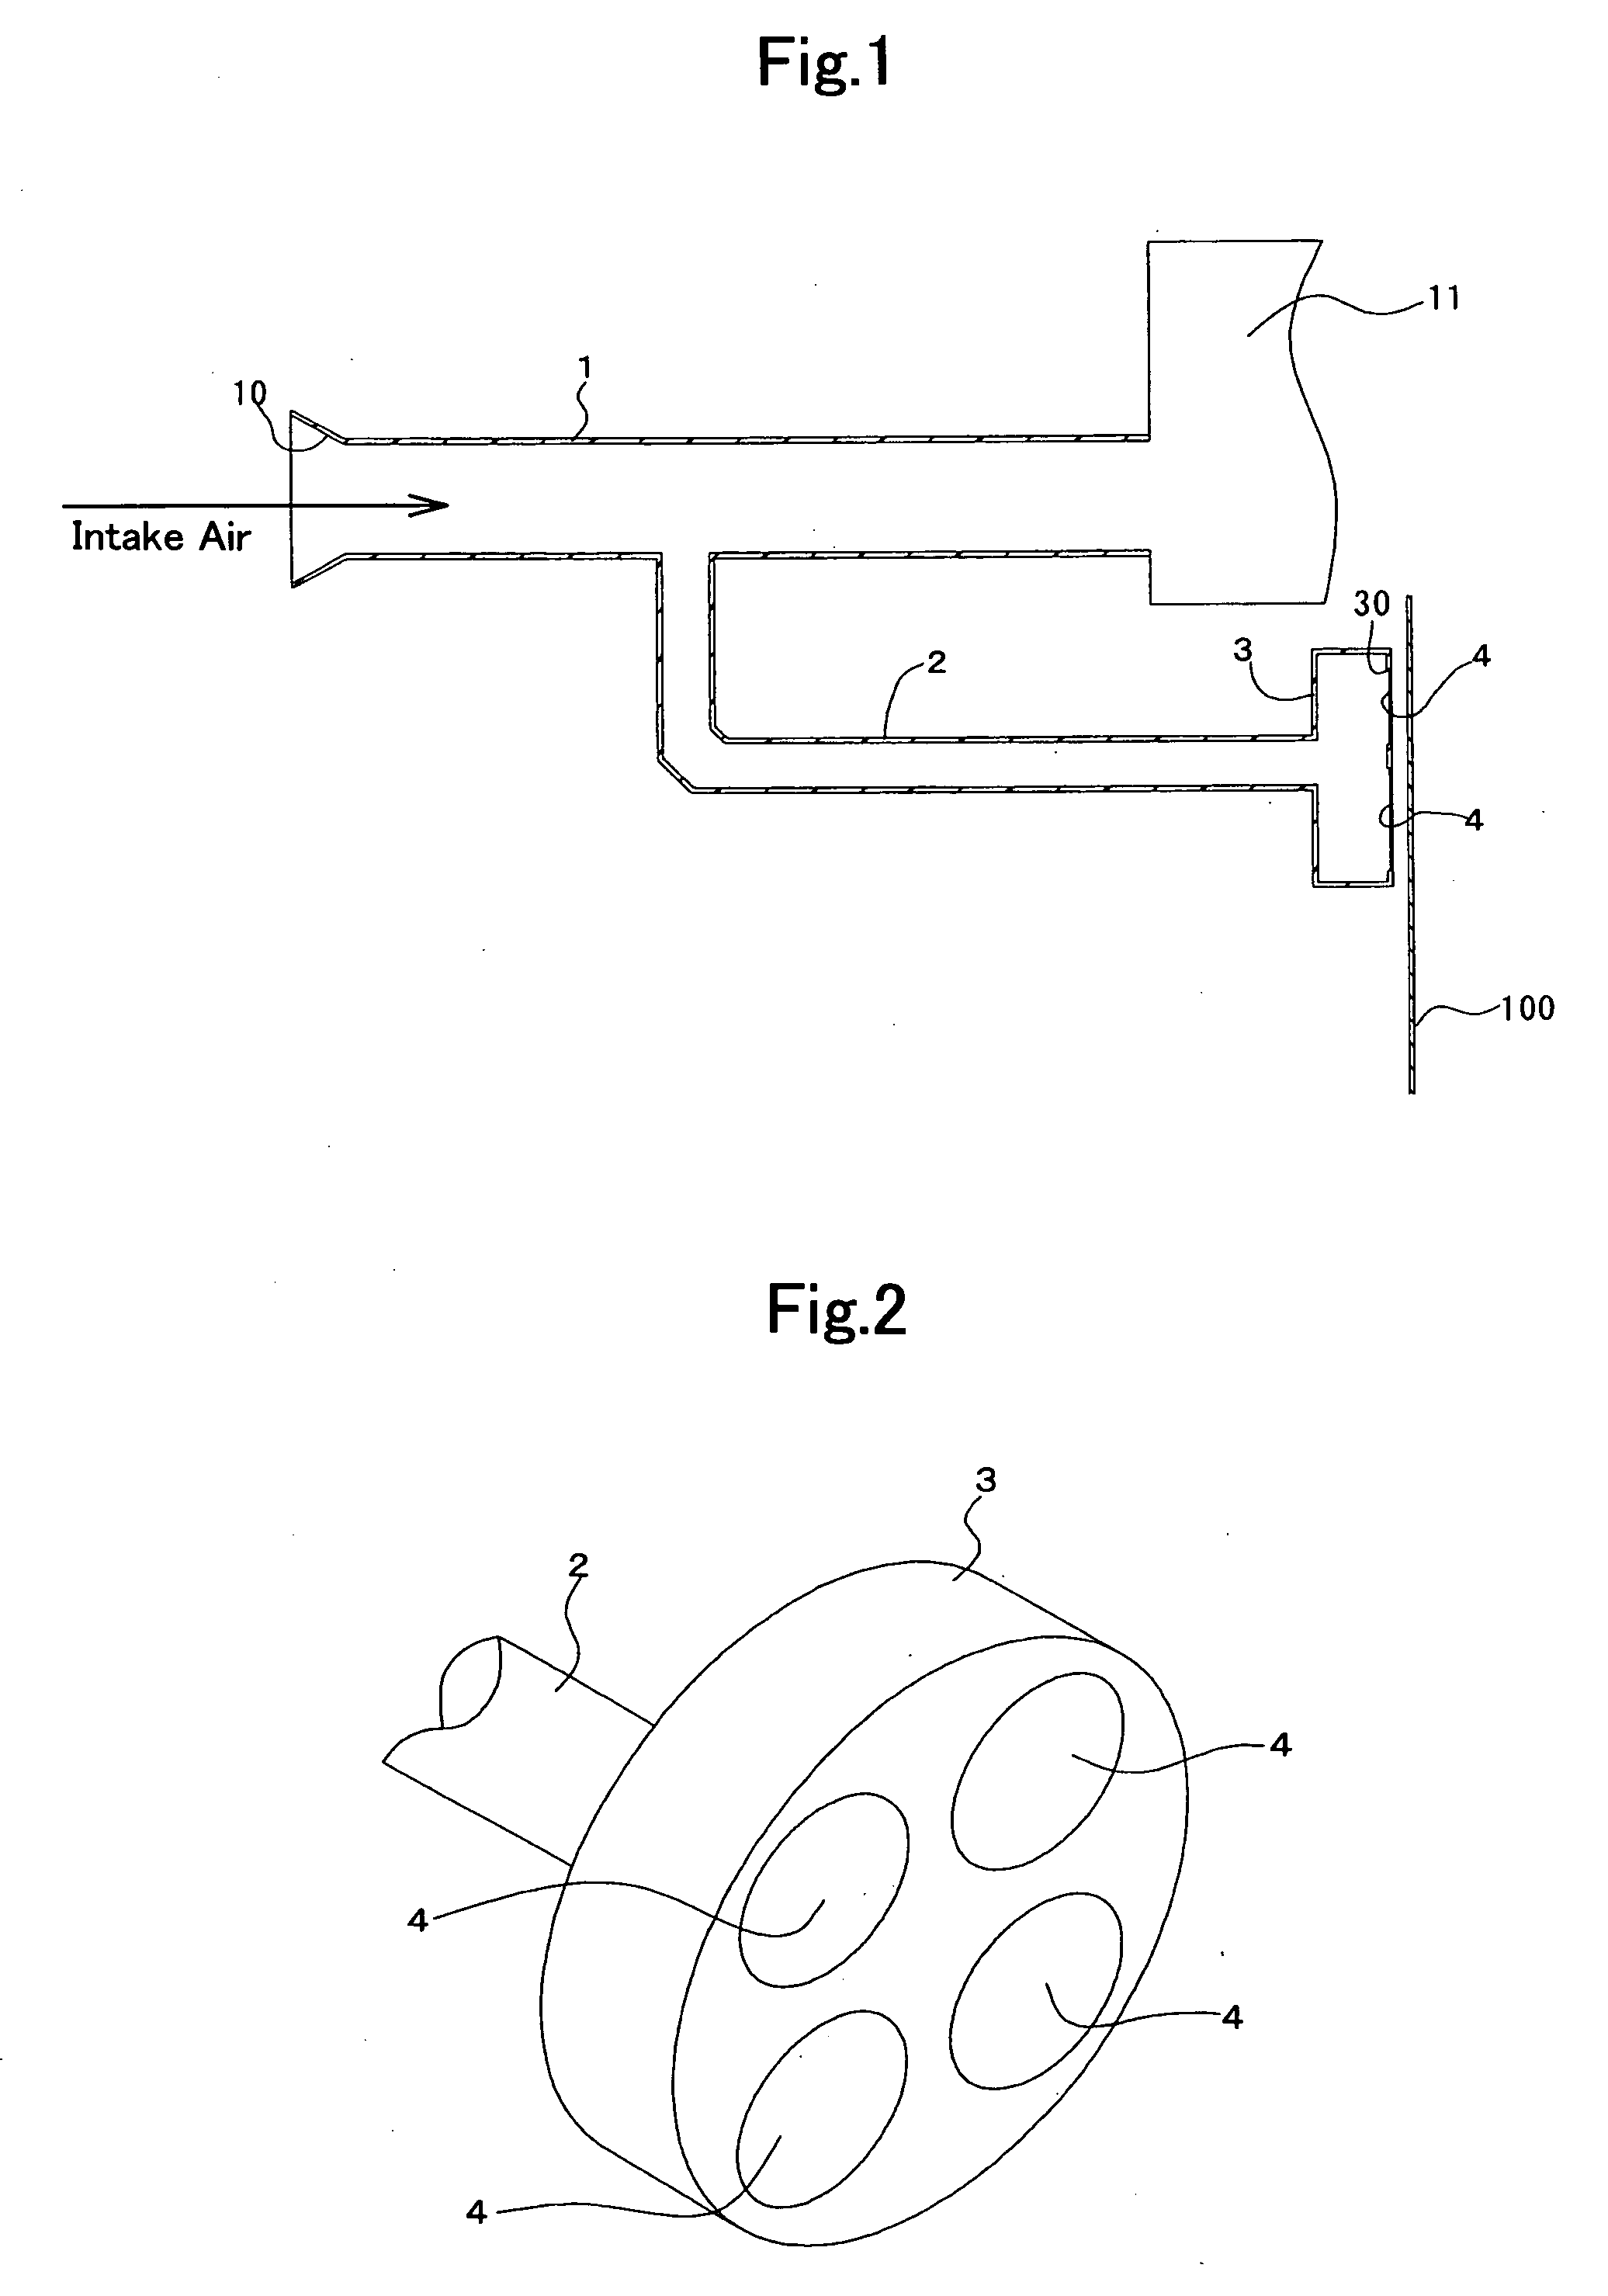 Air intake sound control structure